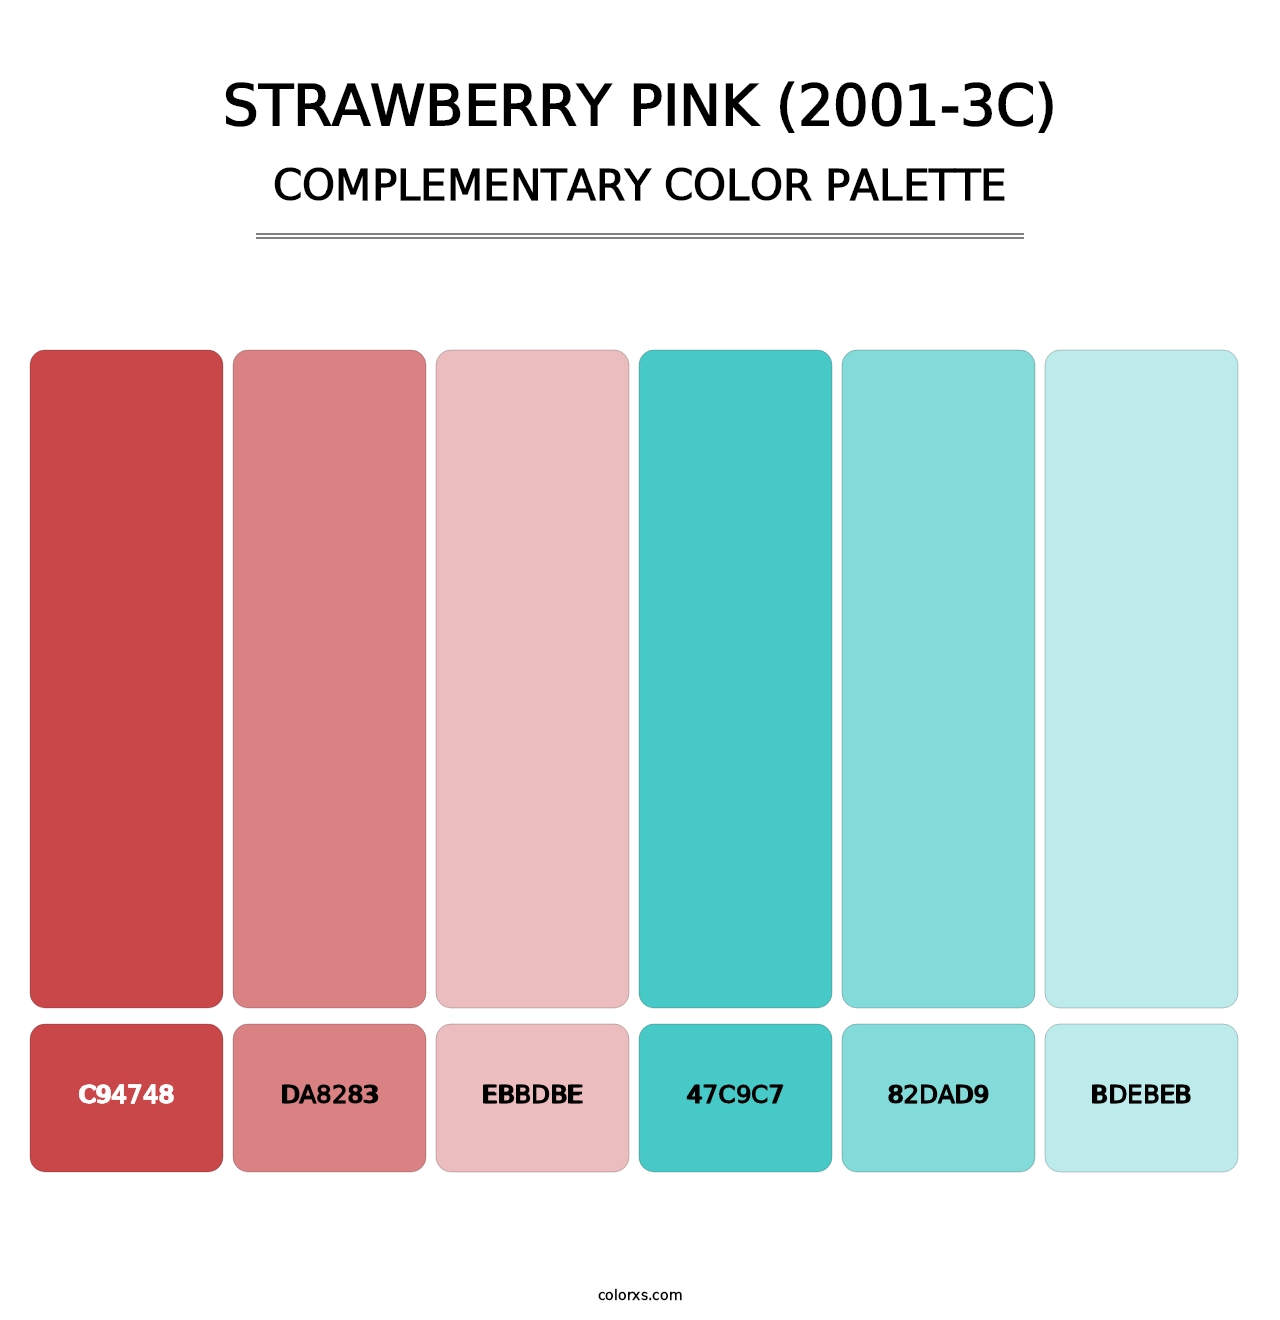 Strawberry Pink (2001-3C) - Complementary Color Palette